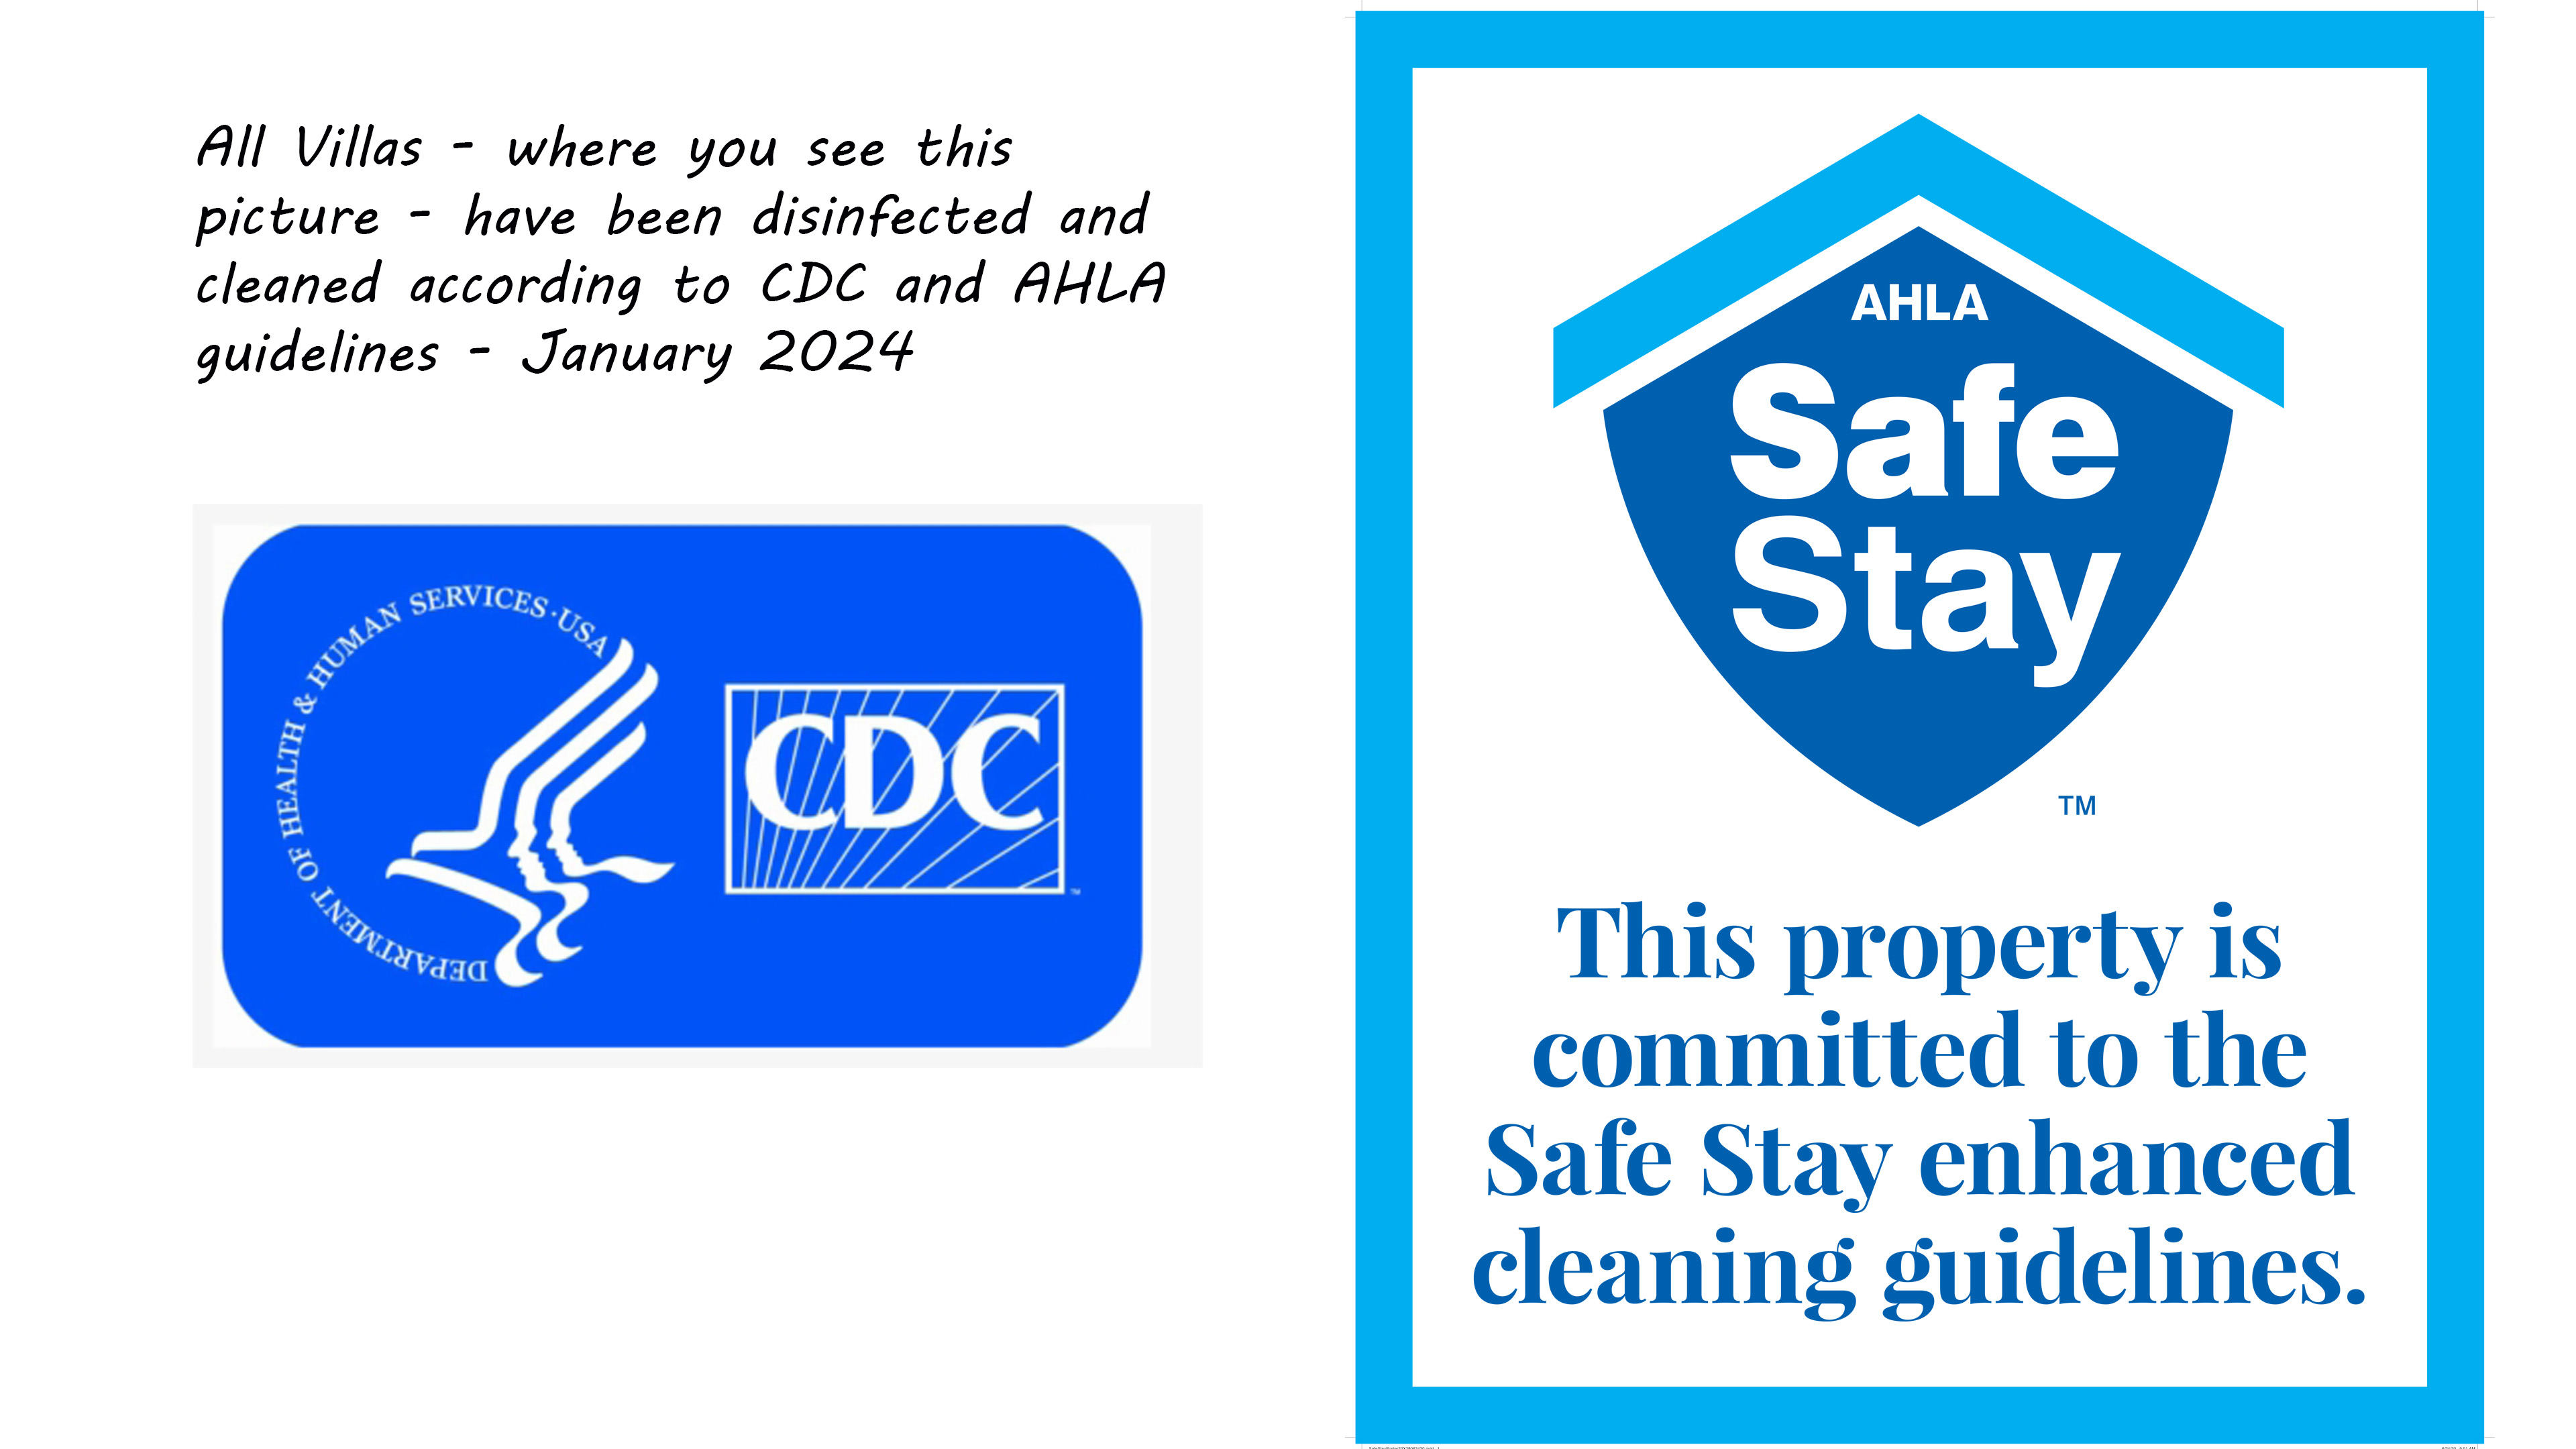 We disinfect and clean our villas according to CDC and AHLA guidelines